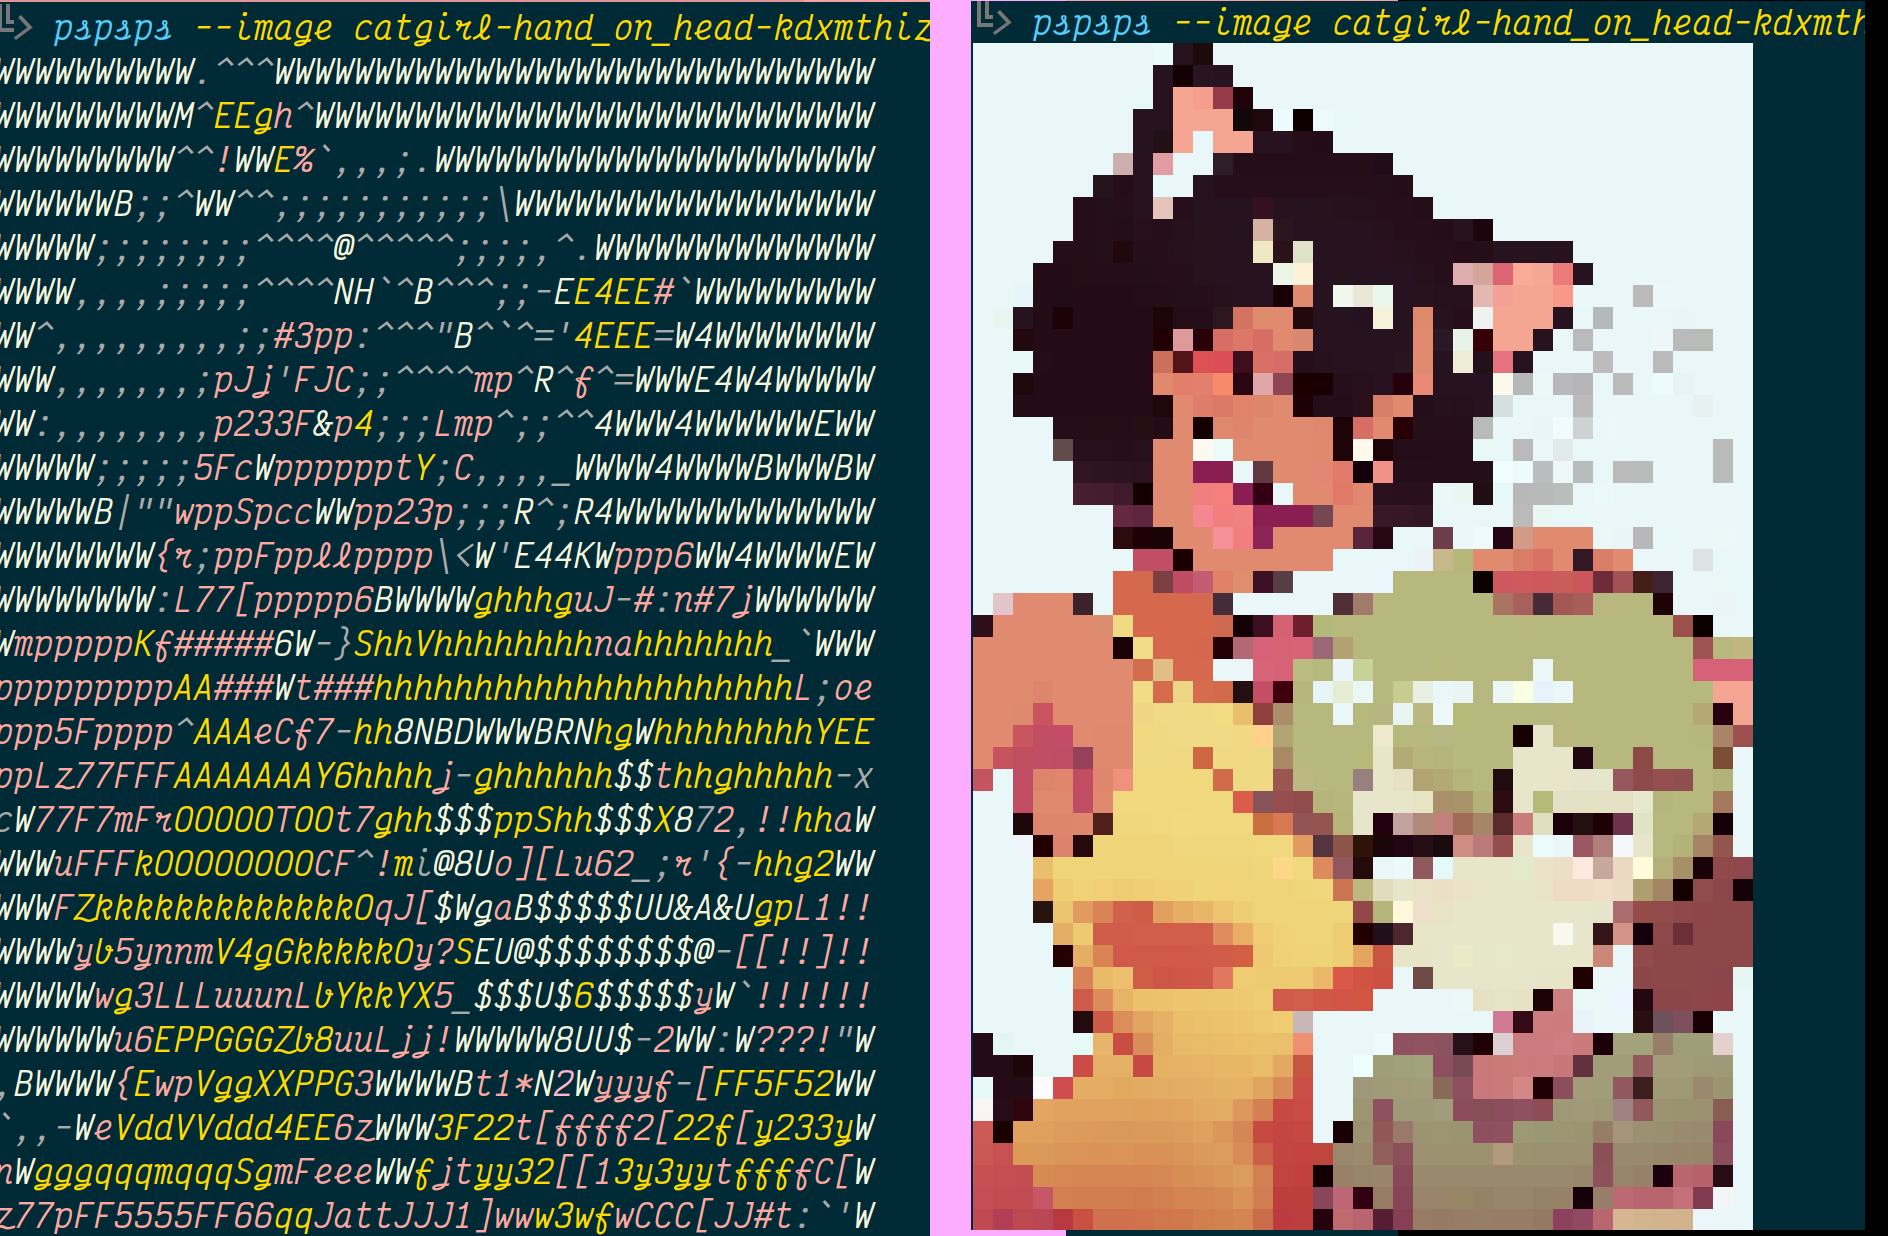 pspsps(1) is drawing catgirls in nyascii and nyansi, on the gnomes' terminals